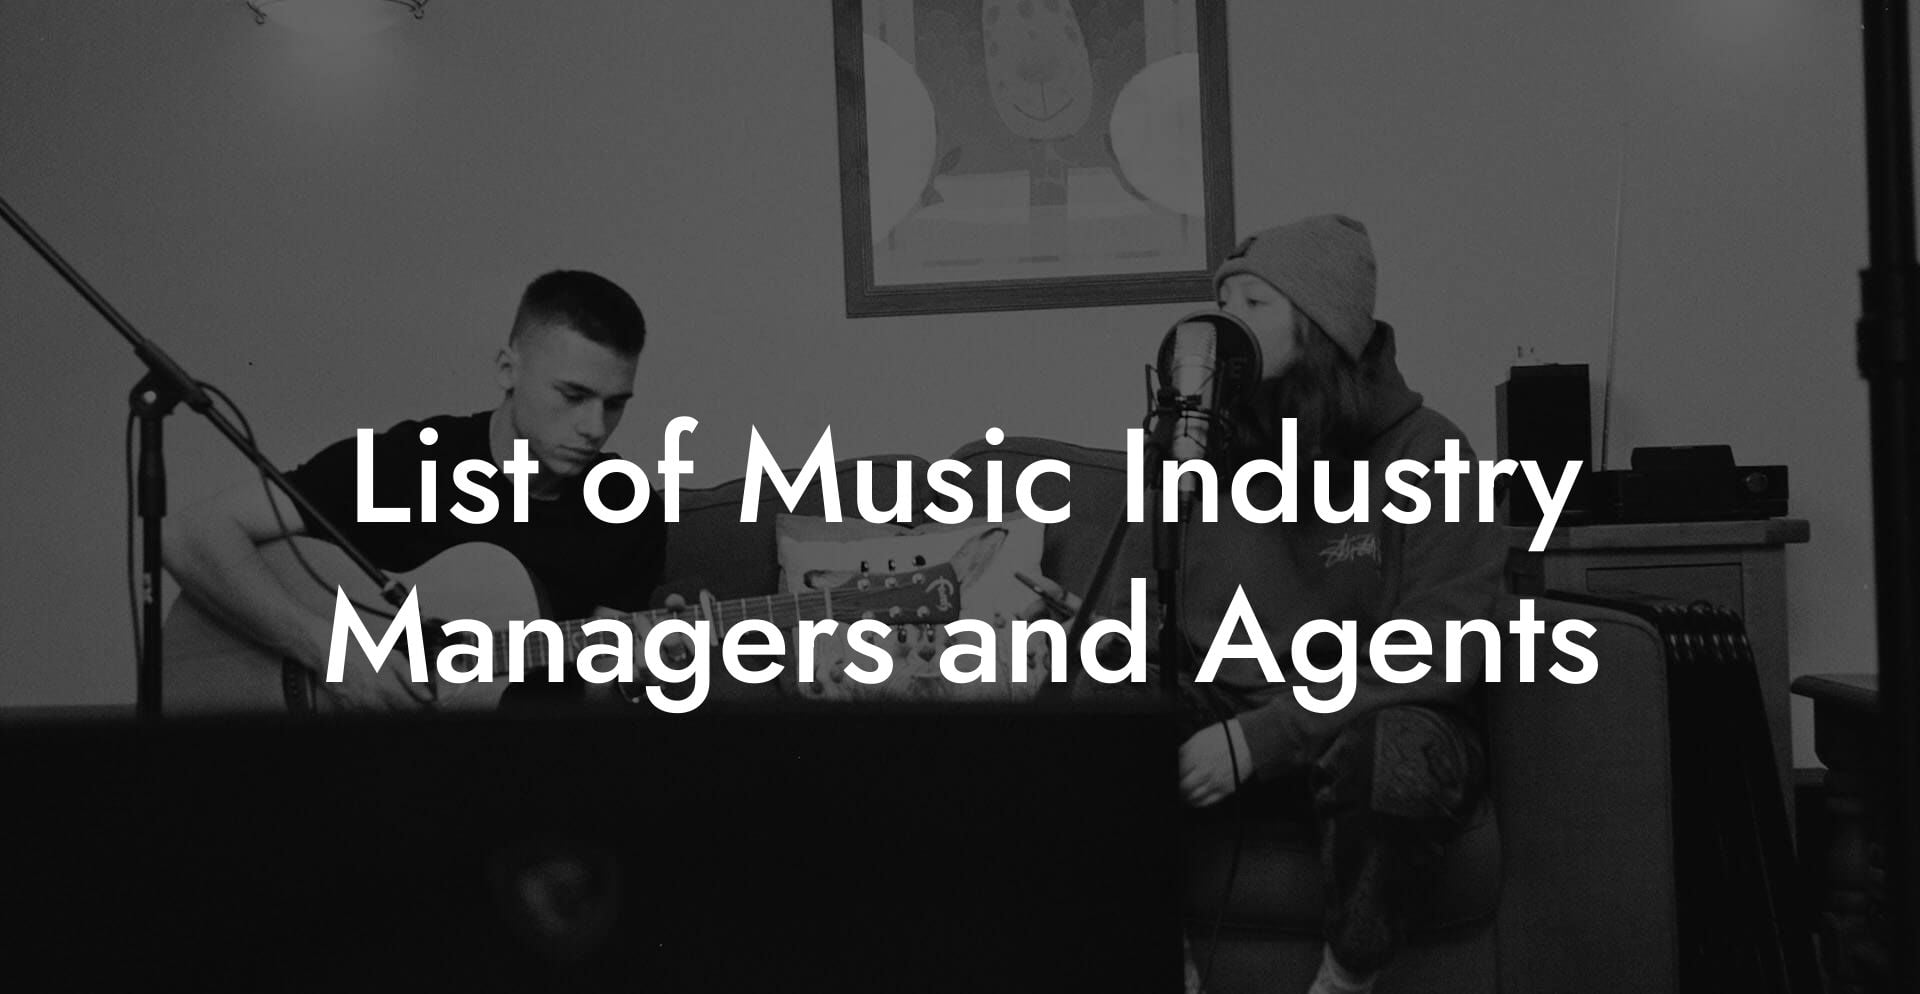 List of Music Industry Managers and Agents